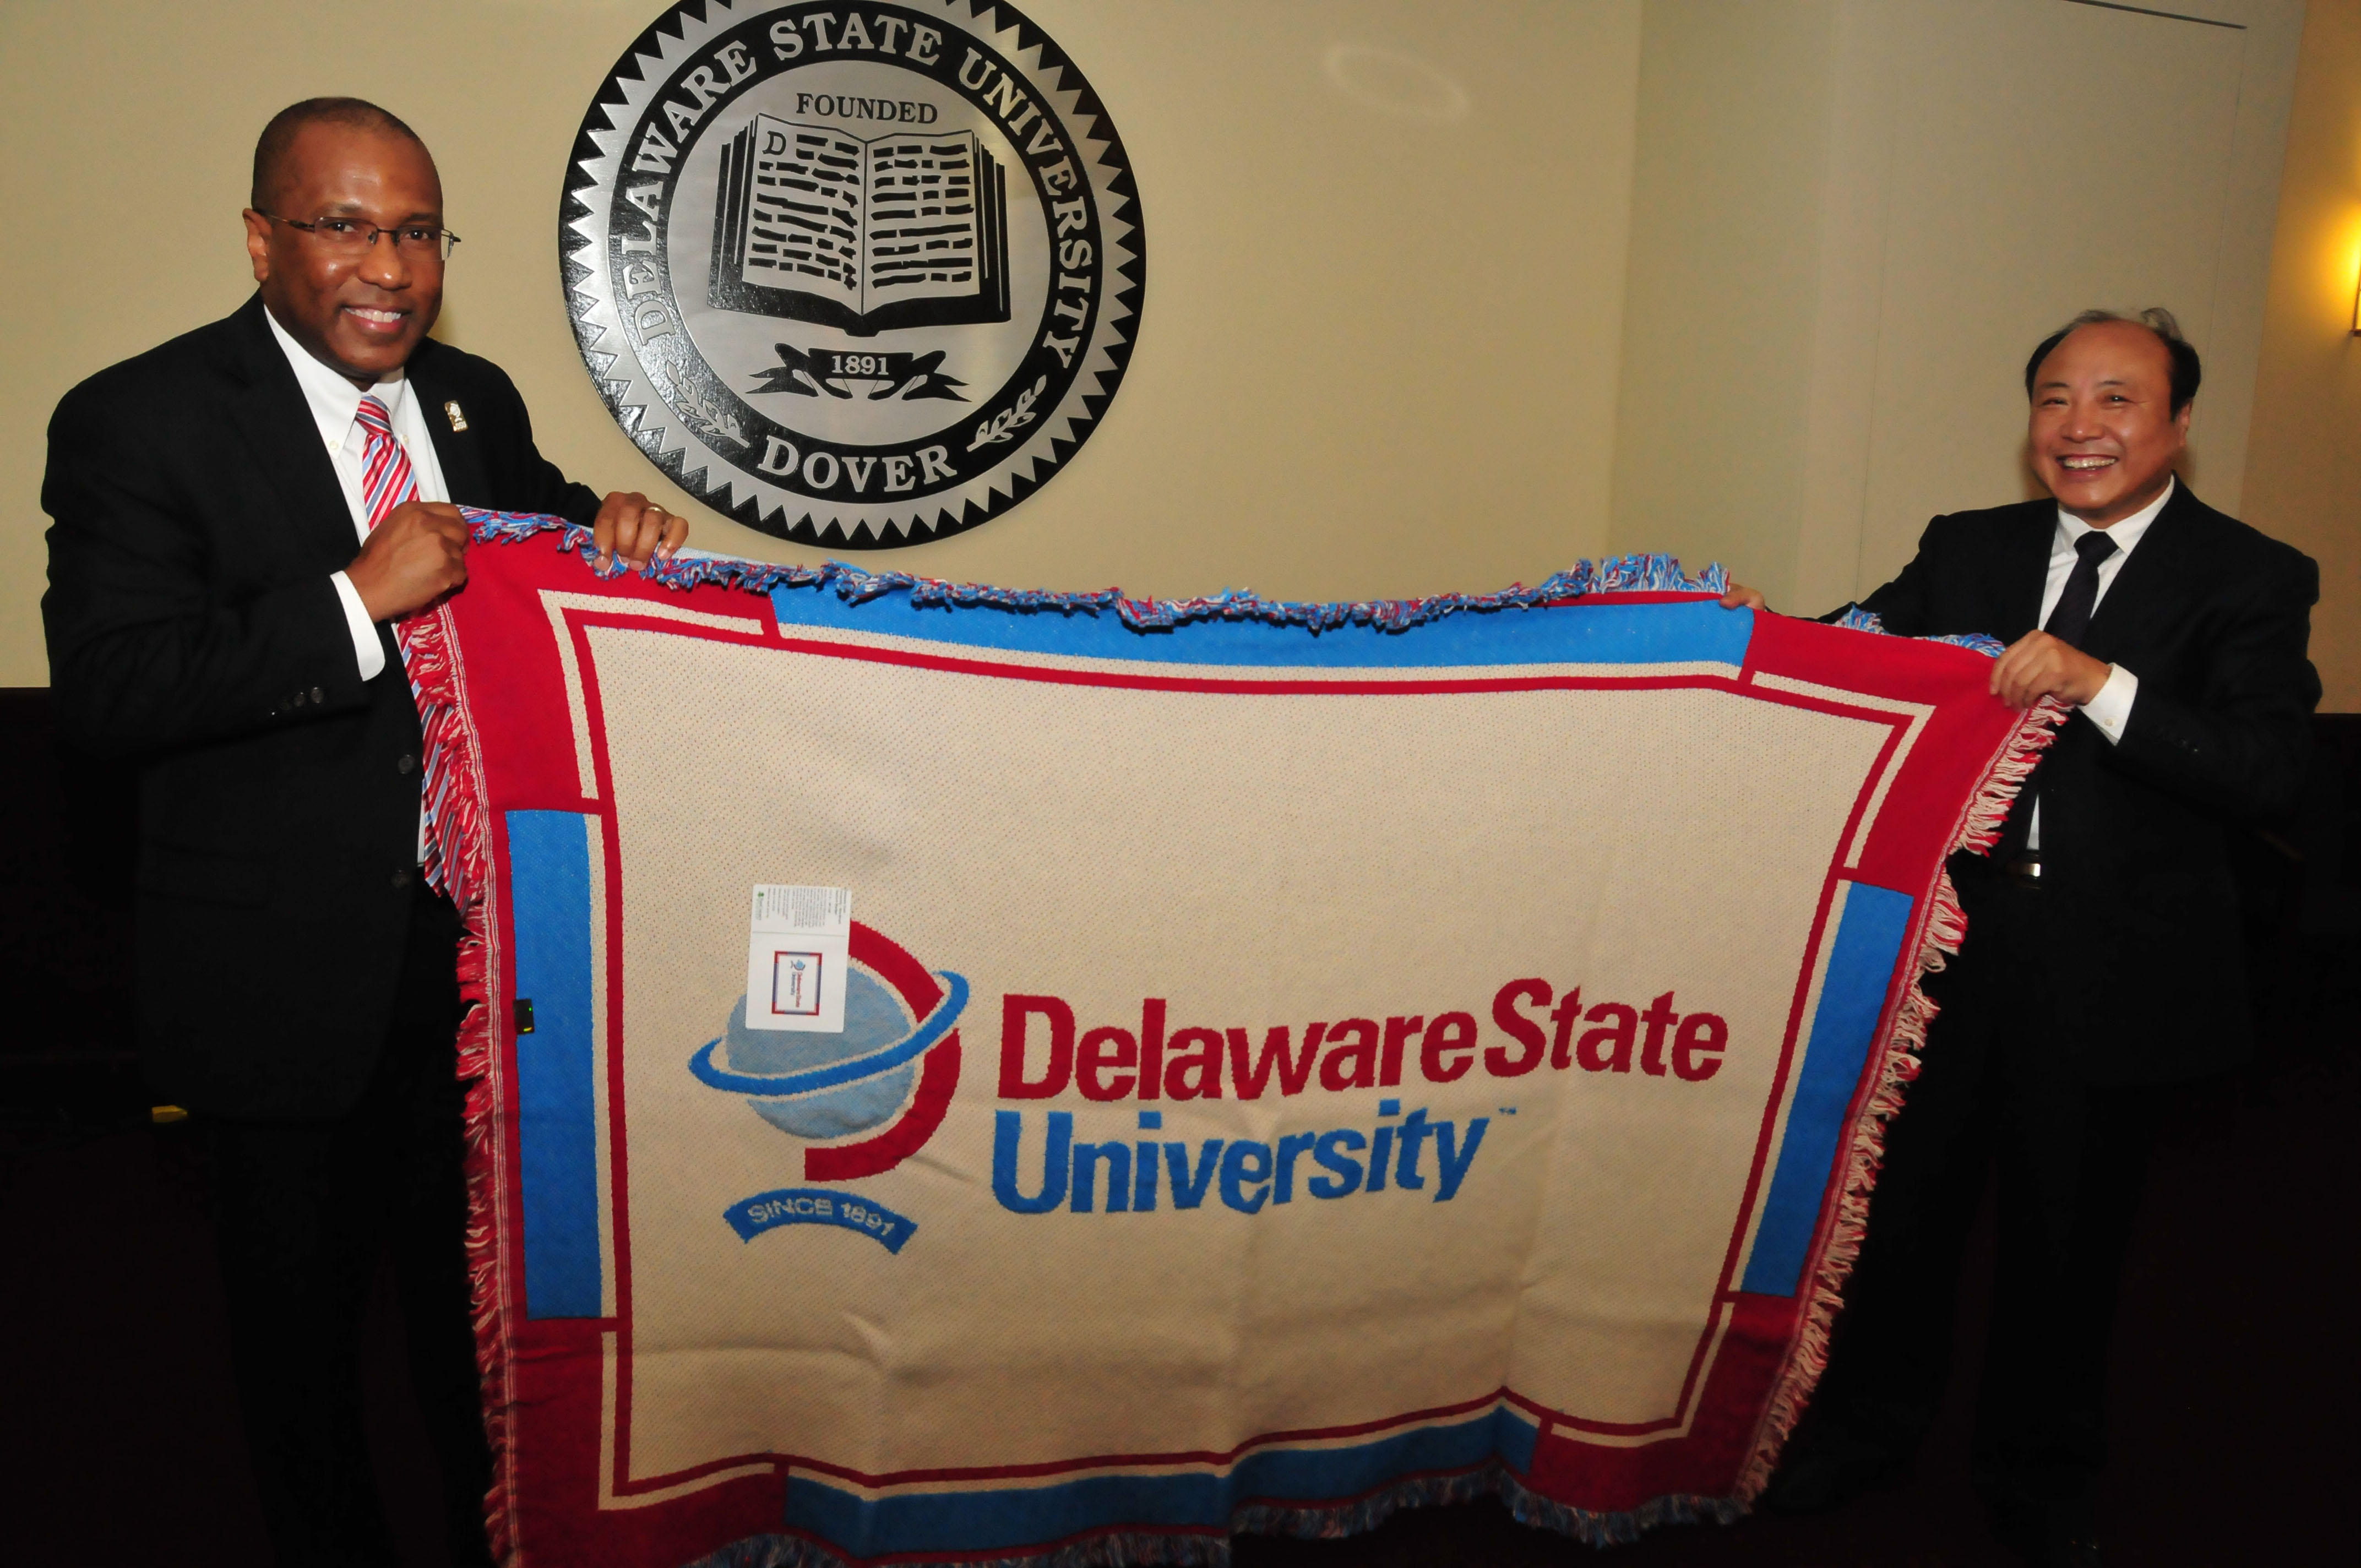 DSU Harry Williams presents a Del State blanket to Dr. Xiang Deming, Beihua VP of research, one of a number of gifts exchanged.